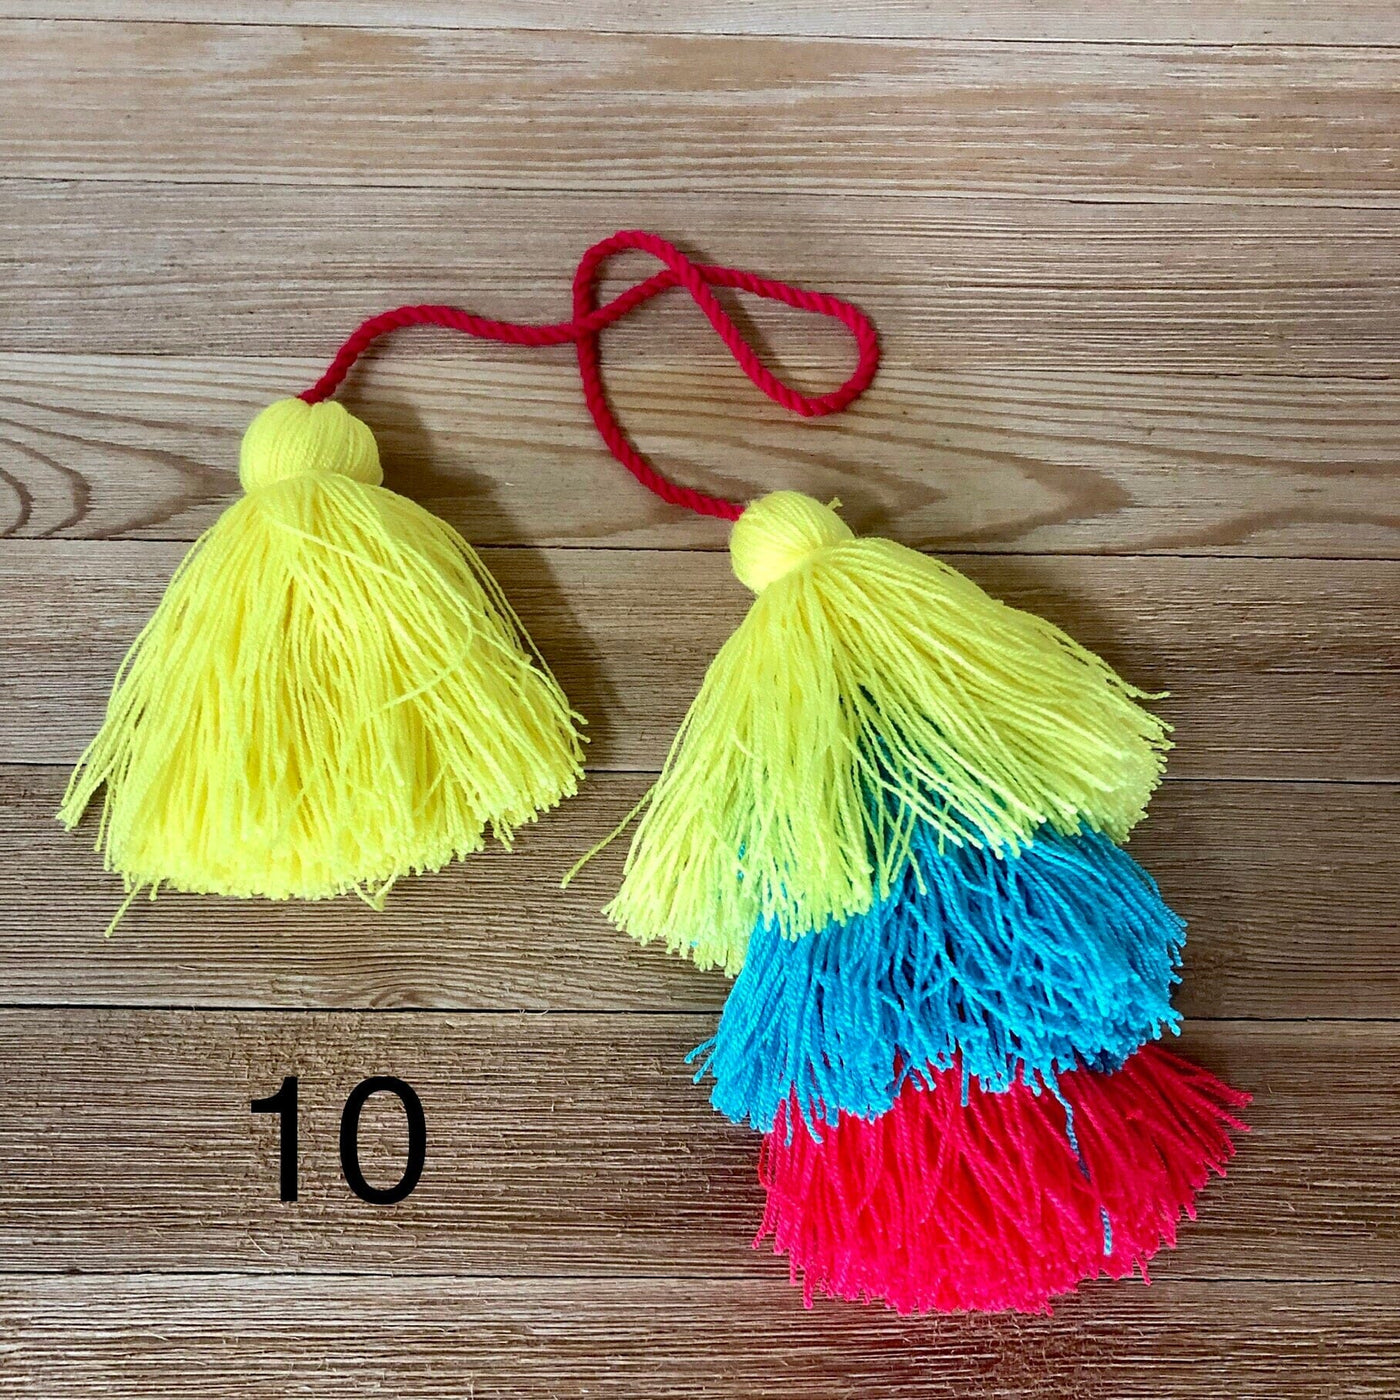 Colorful Tassel Tote-Bag Charms -Large Straw Bag Tassel Charm Tassel Bag Charm 